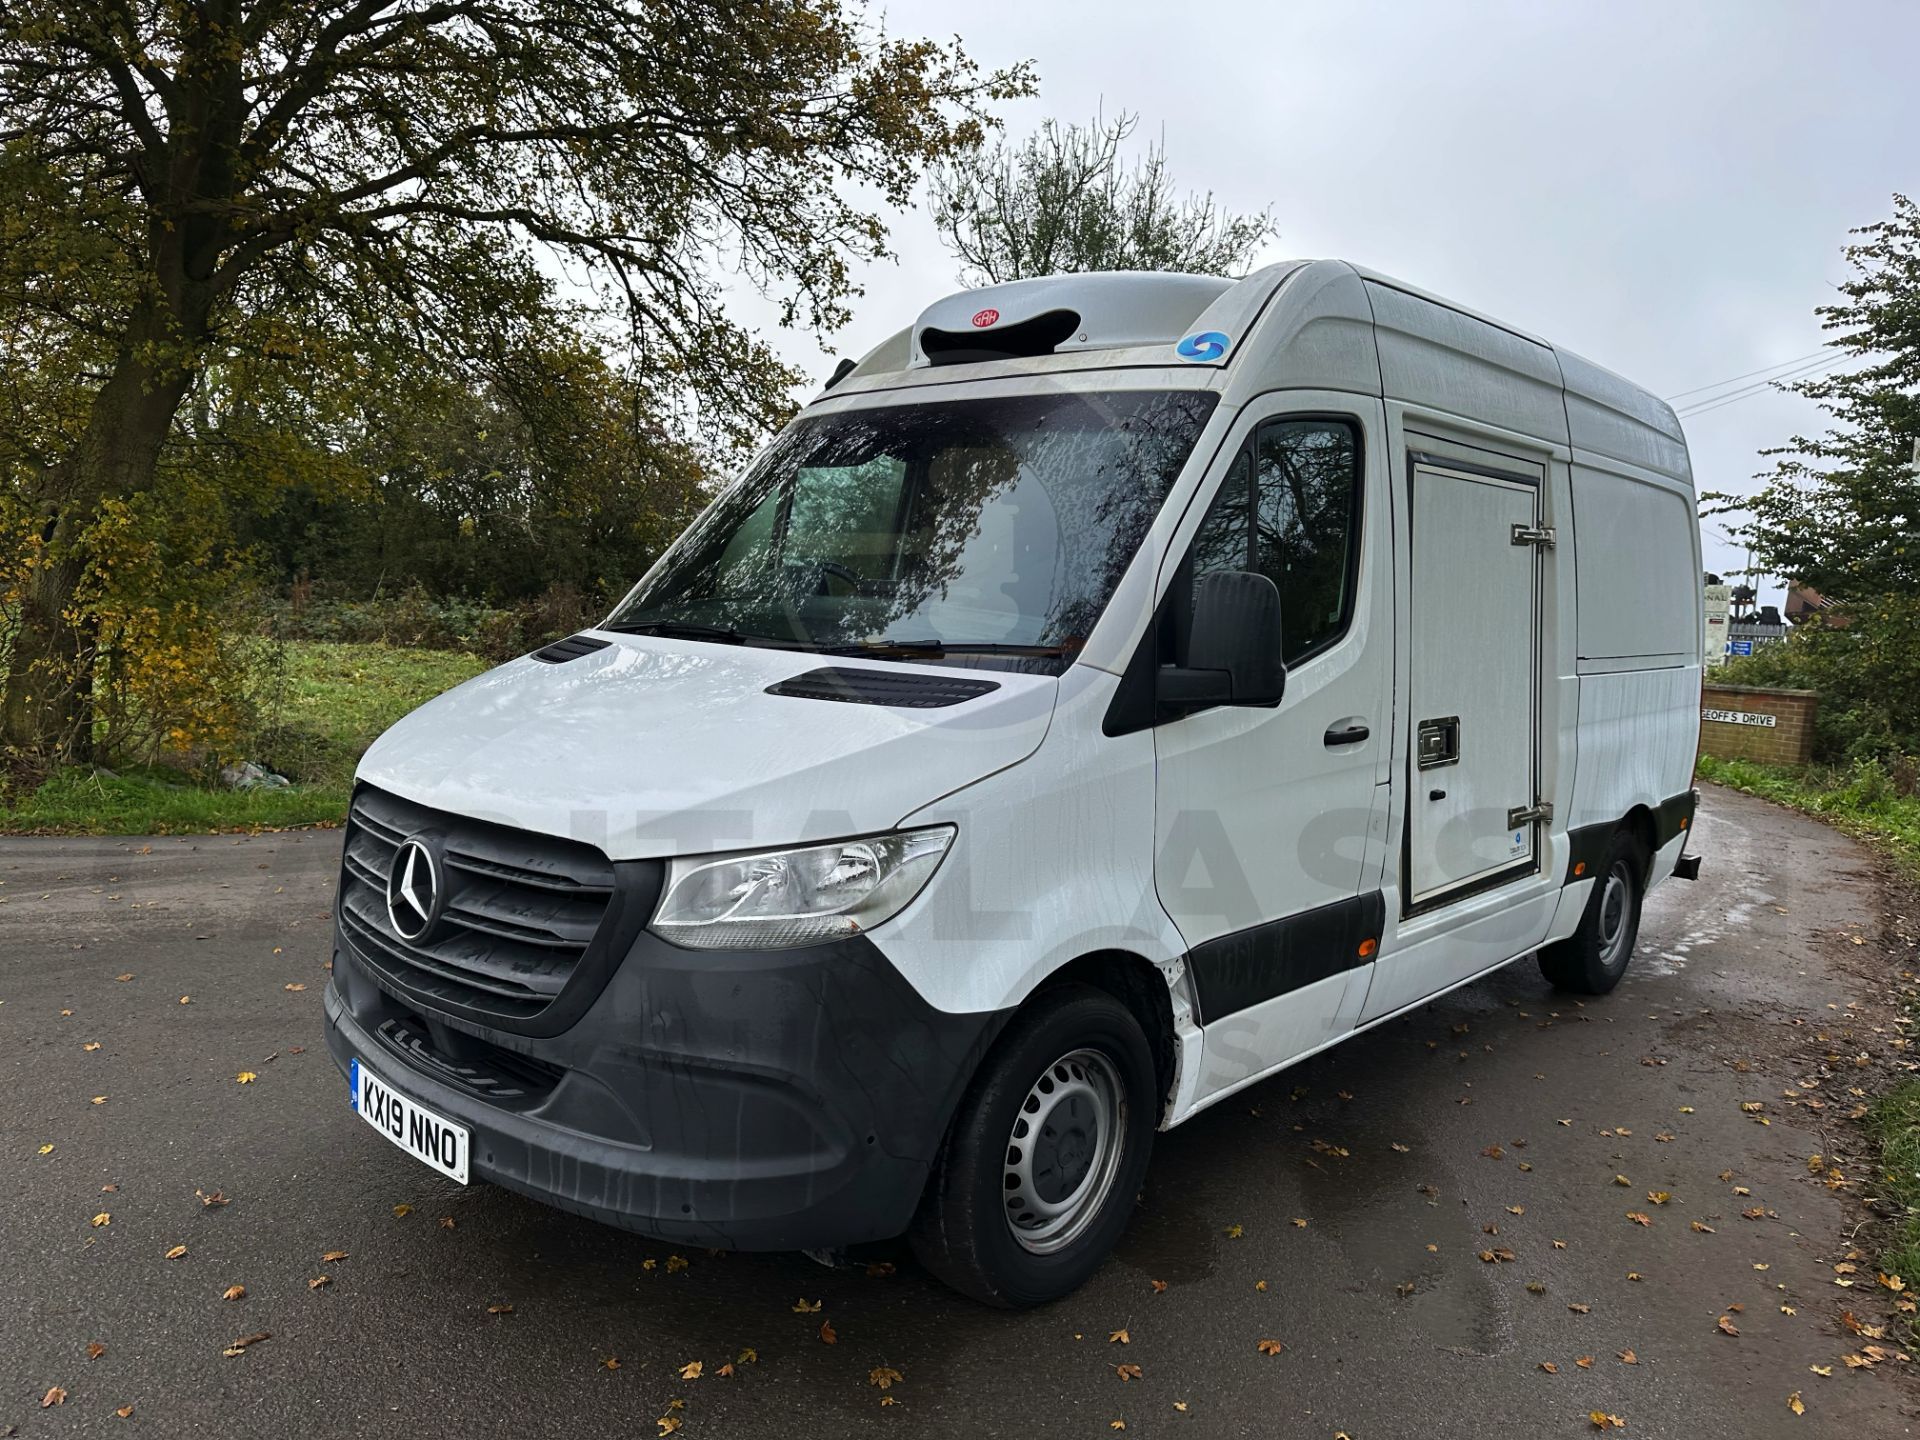 MERCEDES-BENZ SPRINTER 314 CDI *MWB - REFRIGERATED VAN* (2019 - FACELIFT MODEL) *OVERNIGHT STANDBY* - Image 8 of 45